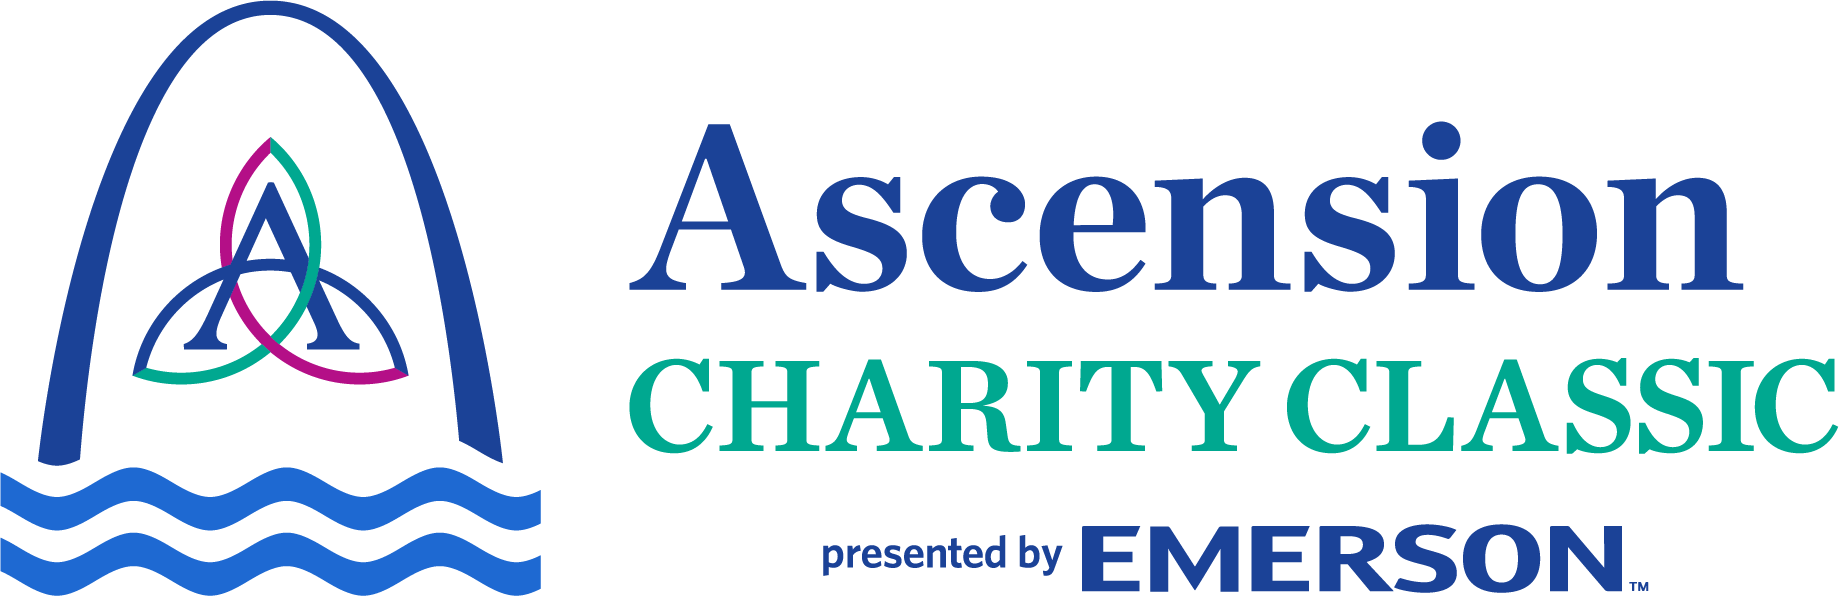 Ascension Charity Classic